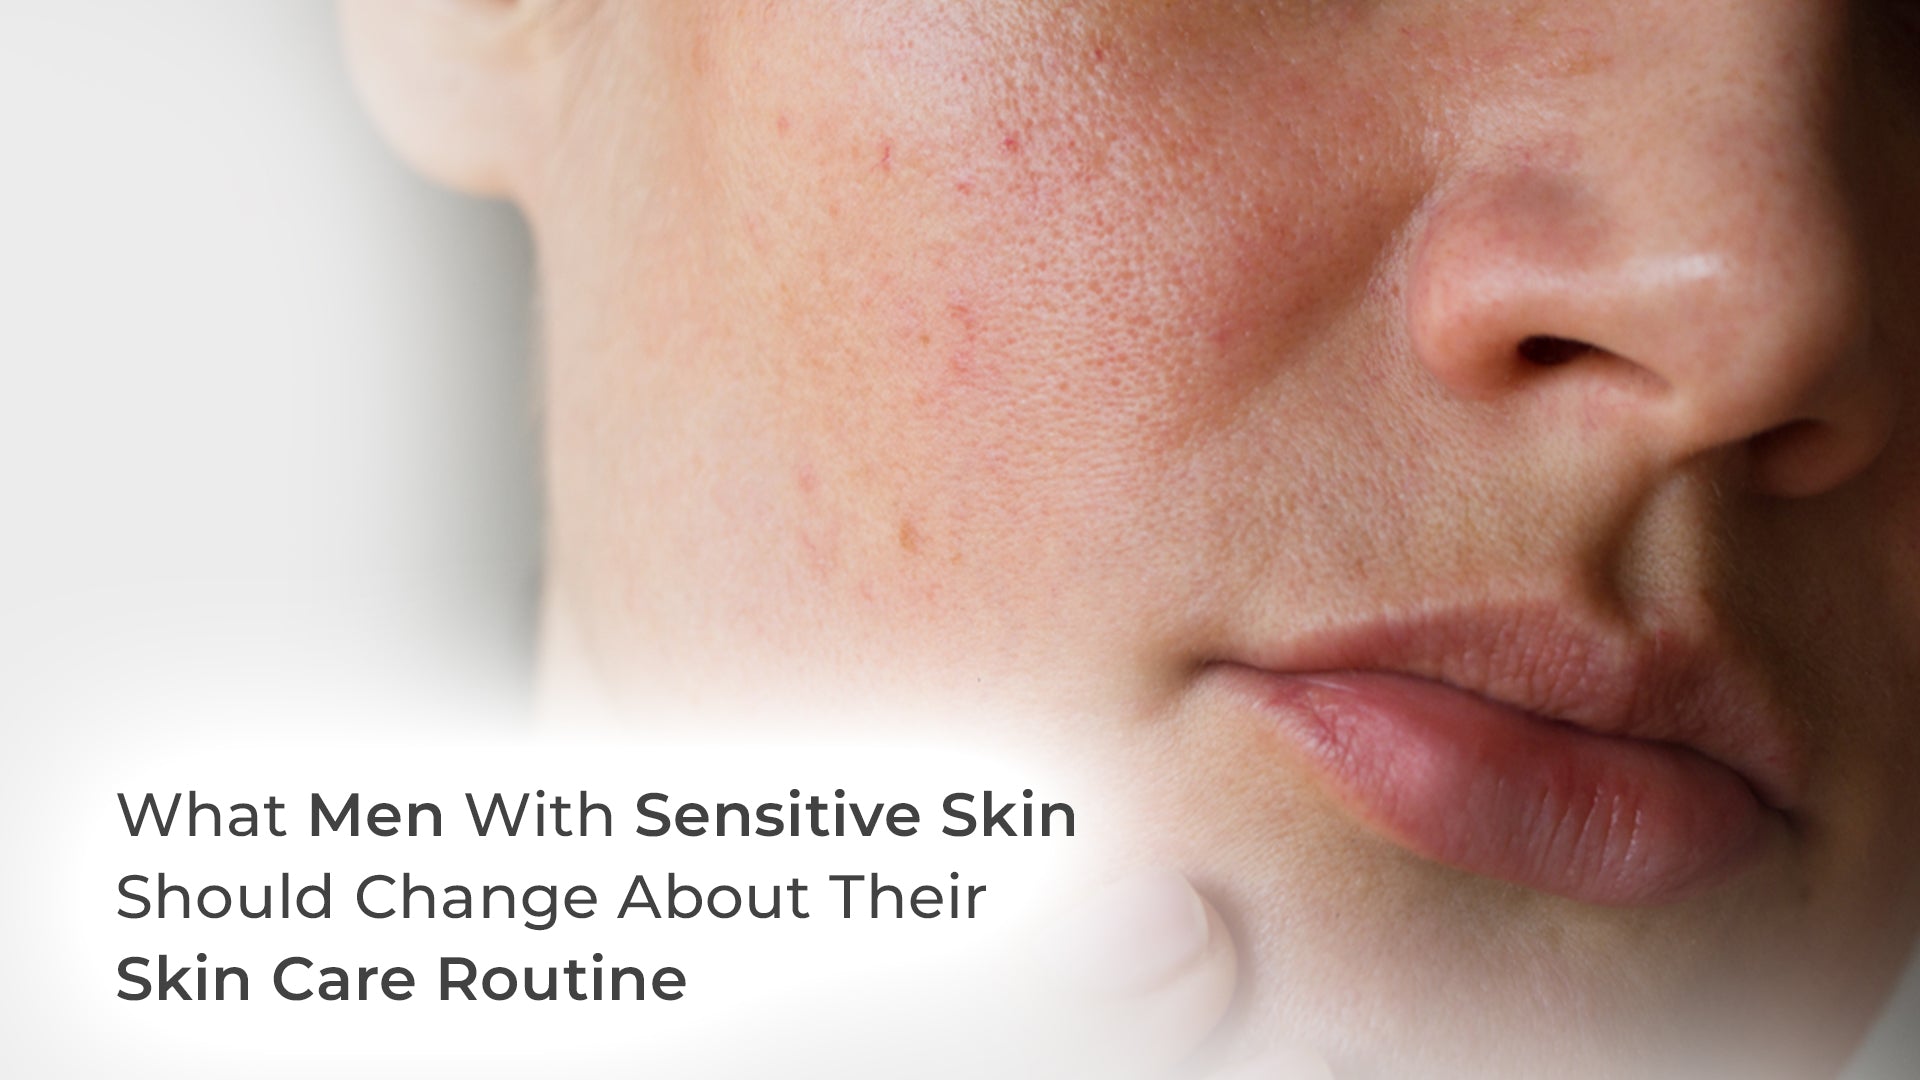 What Men with Sensitive Skin Should Change About Their Skin Care Routine